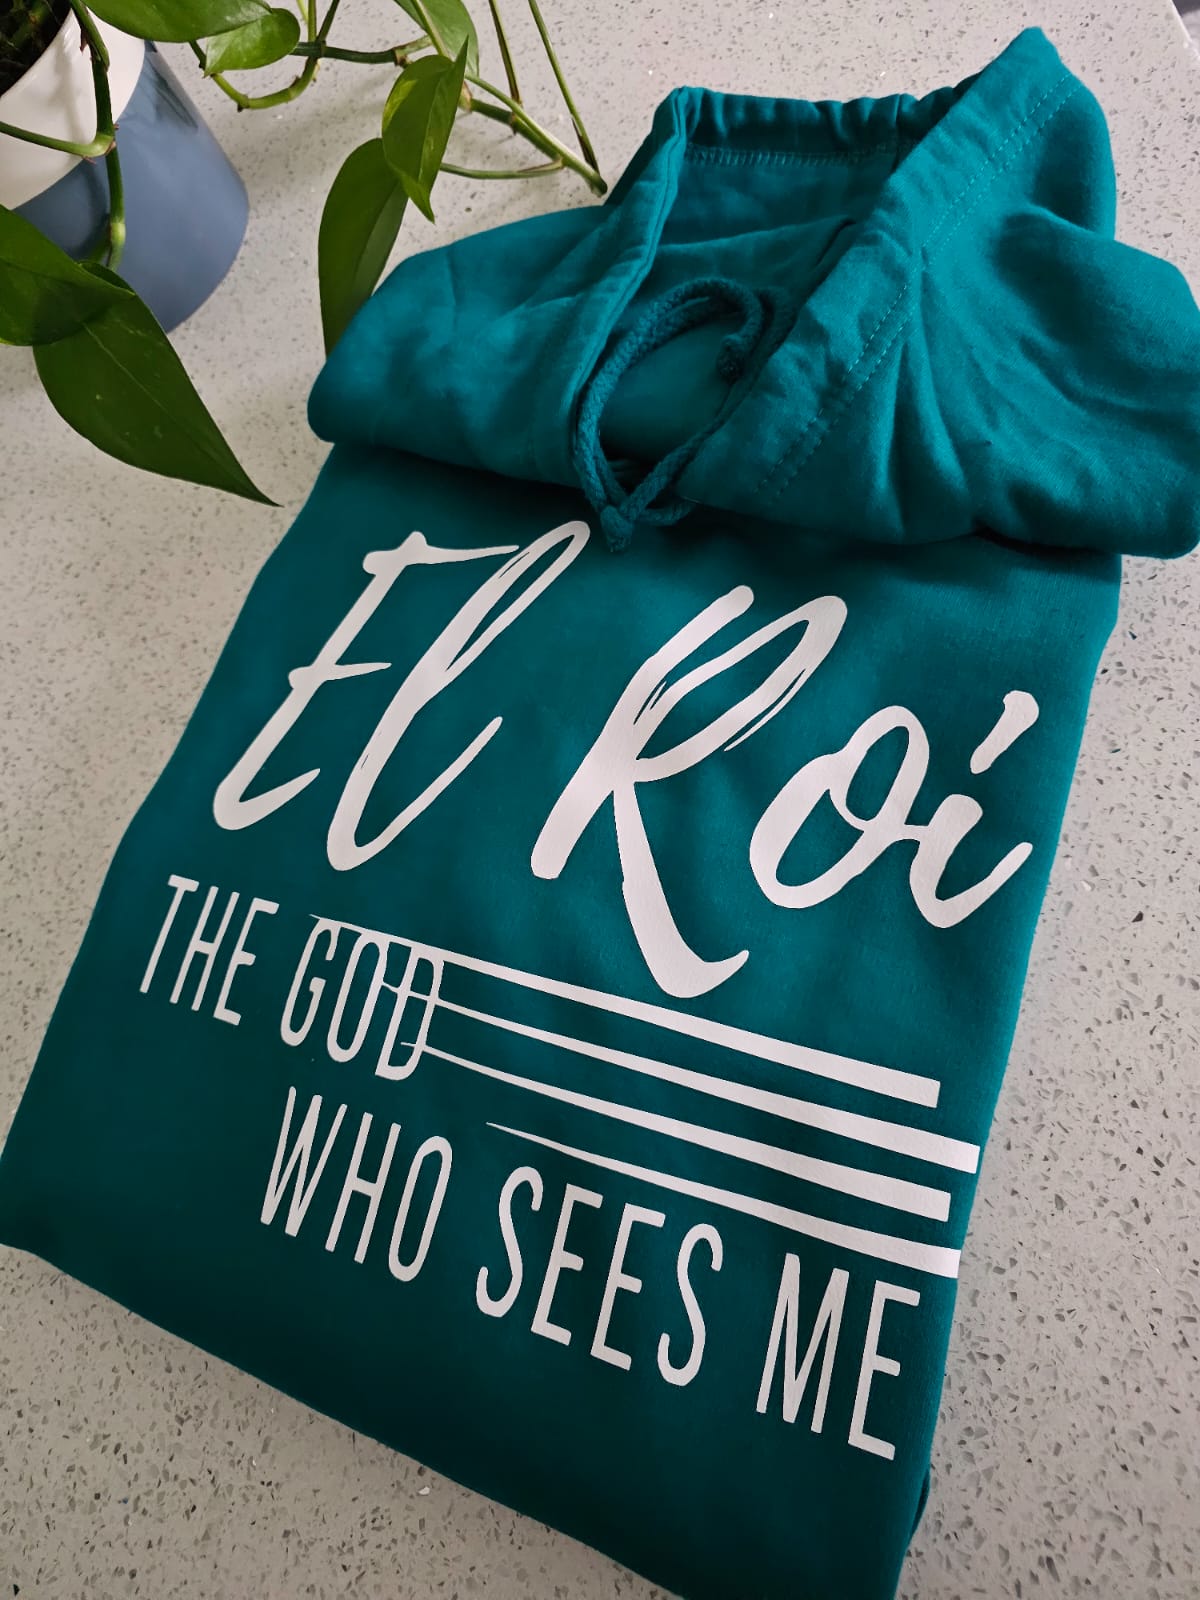 El Roi - The God who sees me